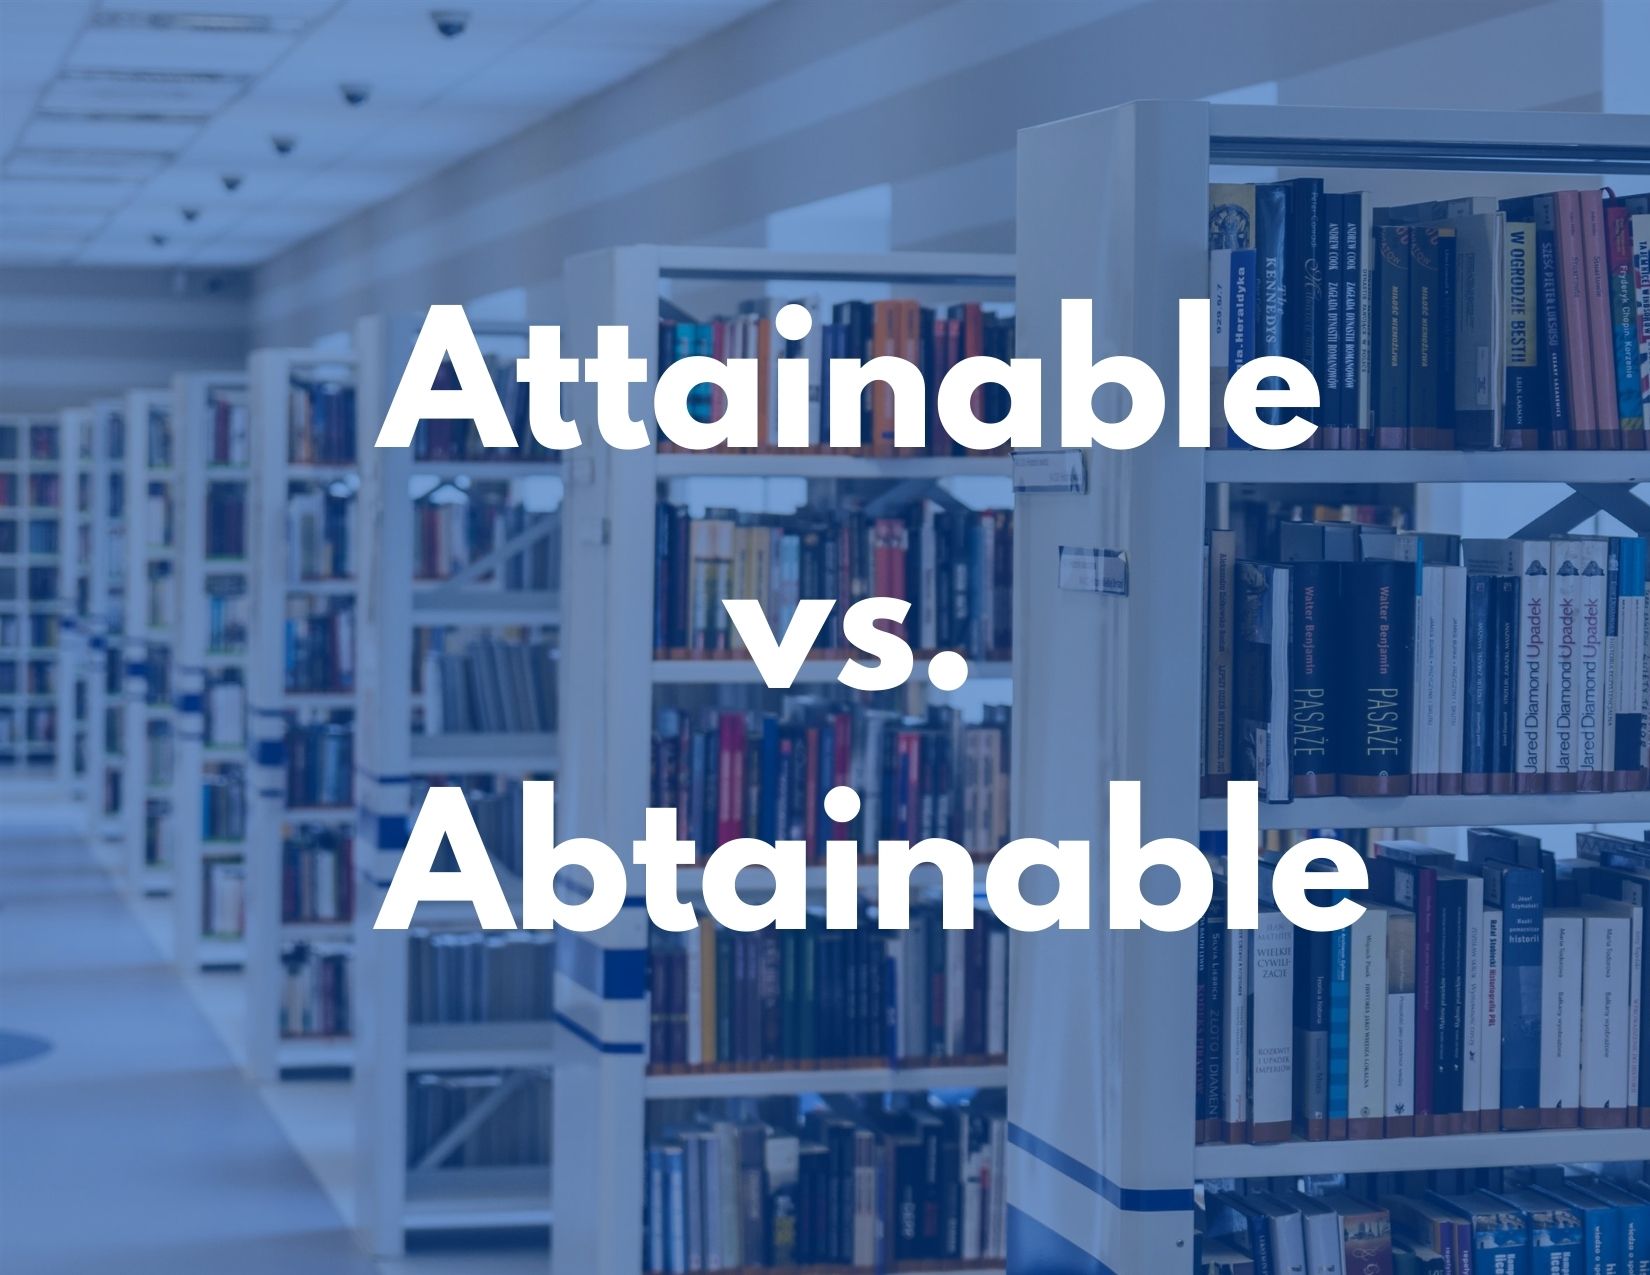 A graphic of a library with the words "attainable vs. obtainable" on the foreground